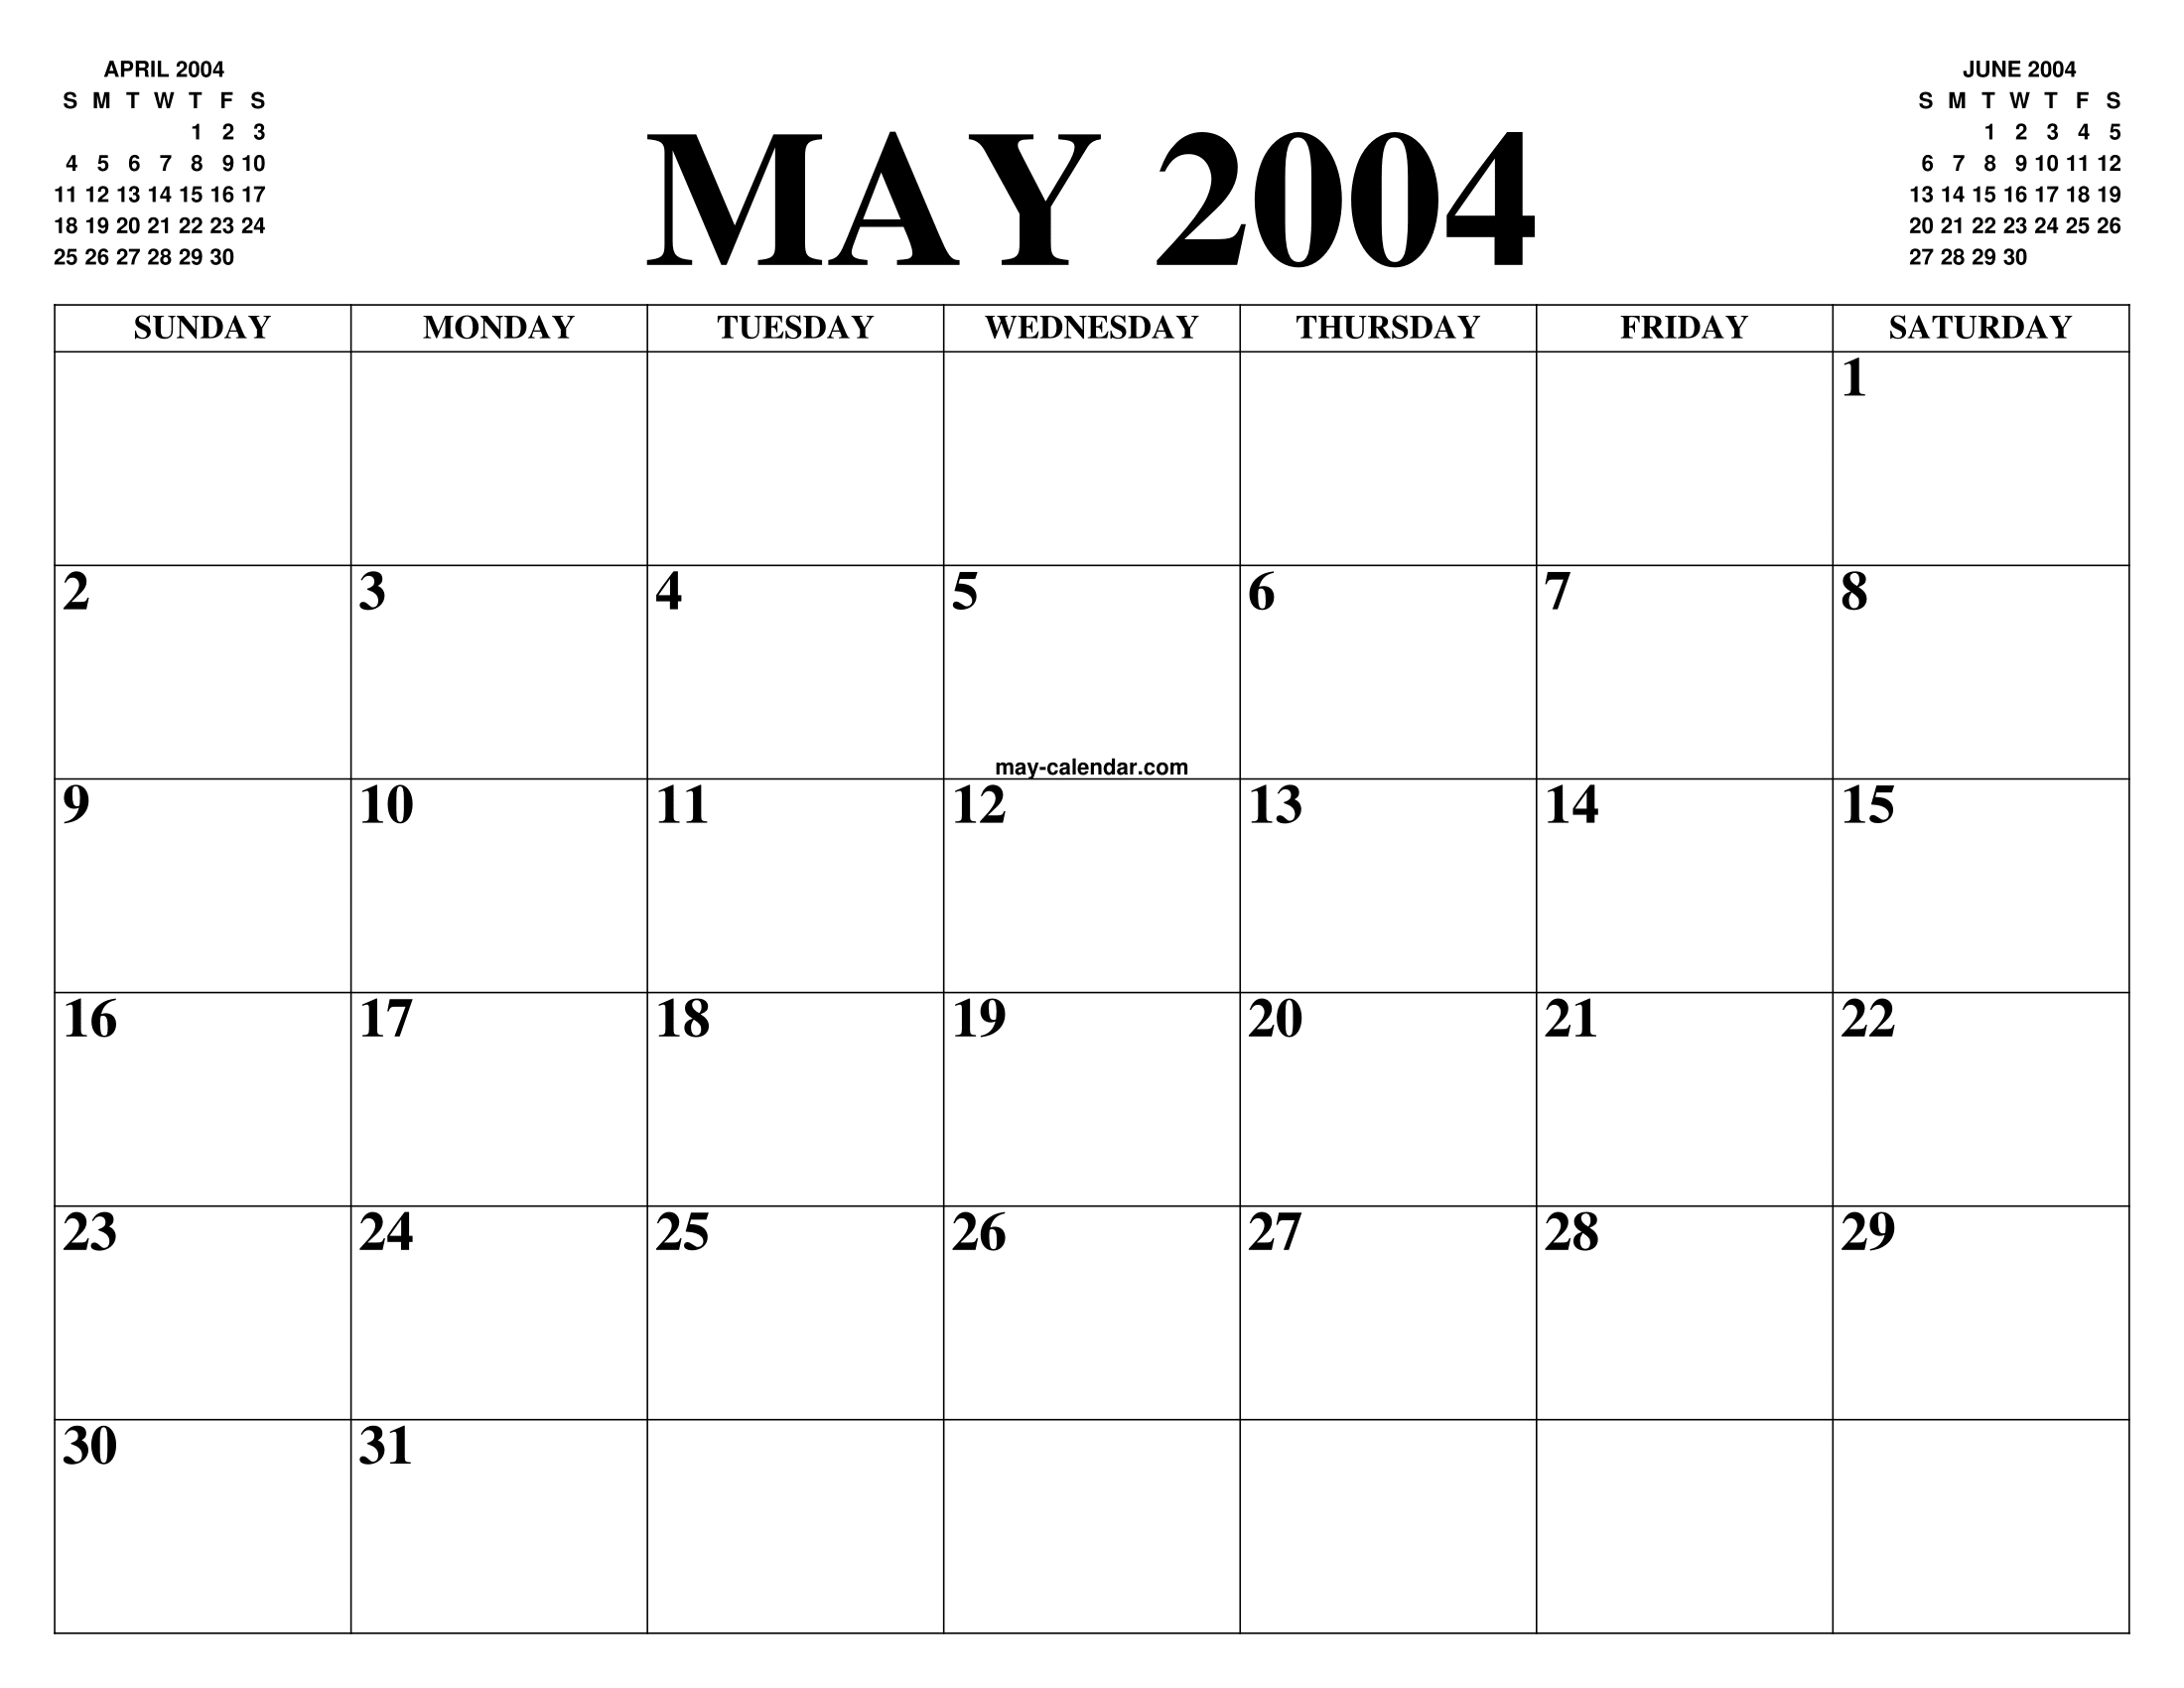 MAY 2004 CALENDAR OF THE MONTH: FREE PRINTABLE MAY CALENDAR OF THE YEAR